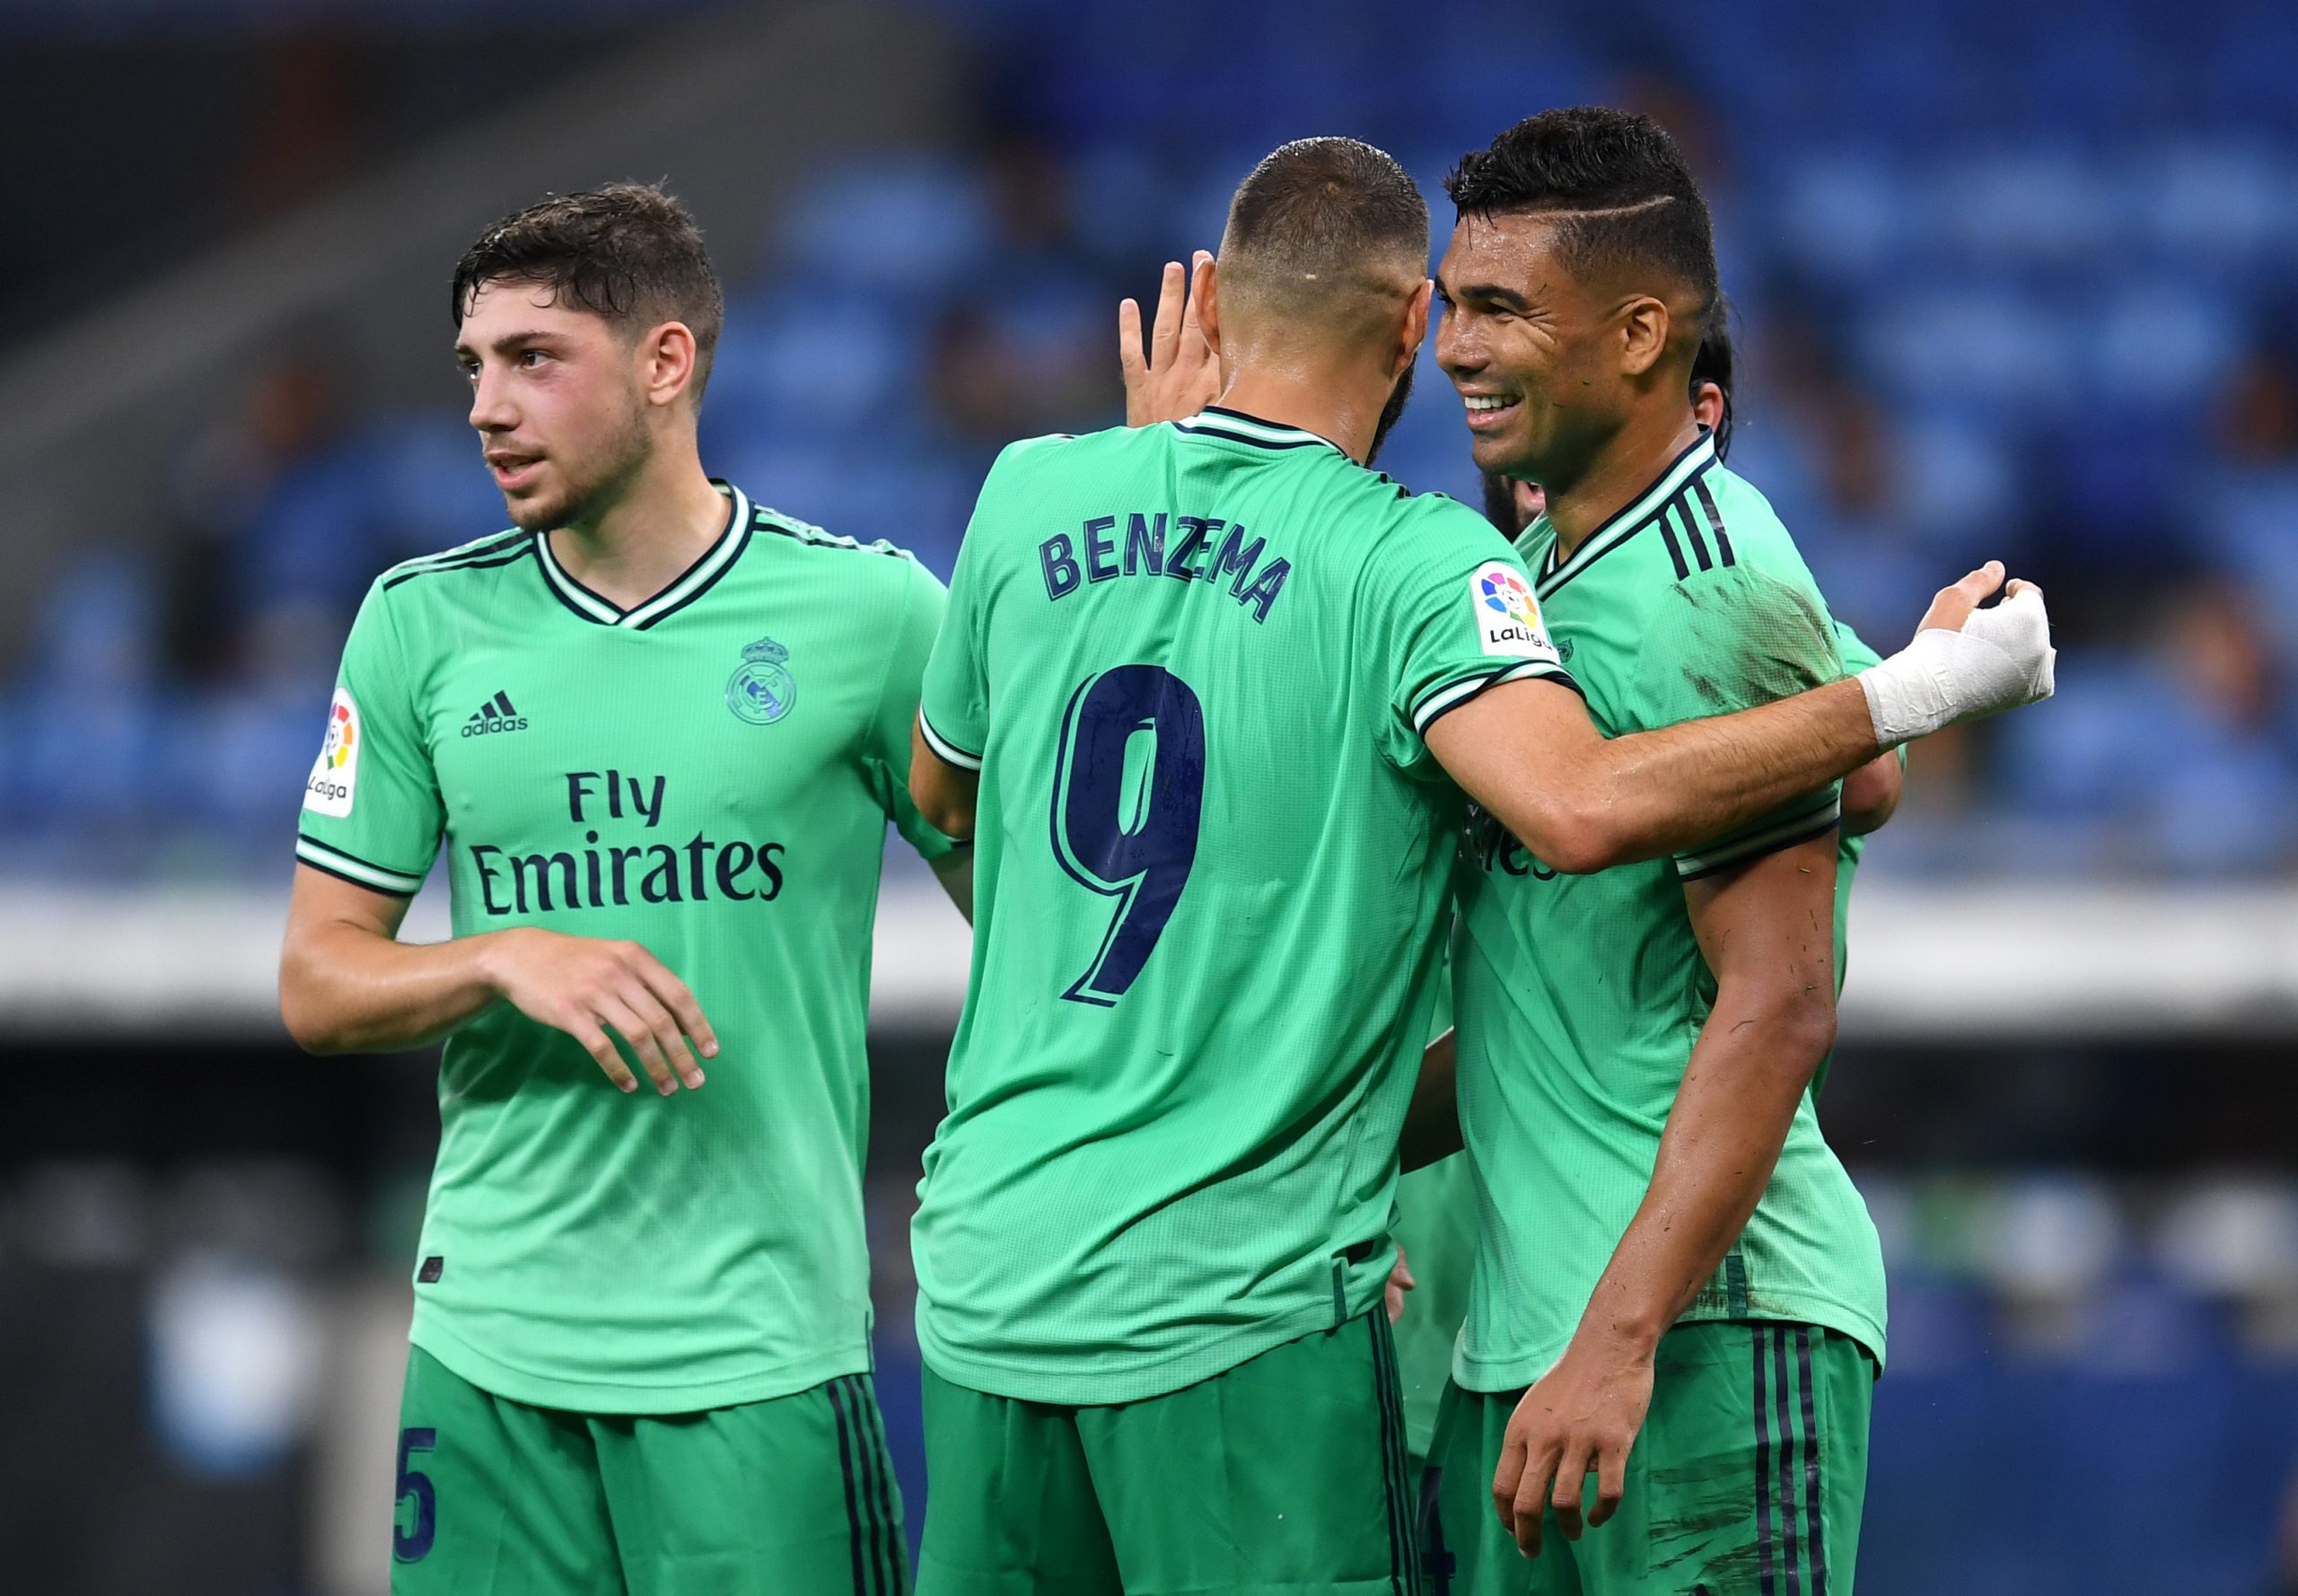 BARCELONA, SPAIN - JUNE 28: Casemiro of Real Madrid celebrates with teammates after scoring his sides first goal during the Liga match between RCD Espanyol and Real Madrid CF at RCDE Stadium on June 28, 2020 in Barcelona, Spain. (Photo by David Ramos/Getty Images)